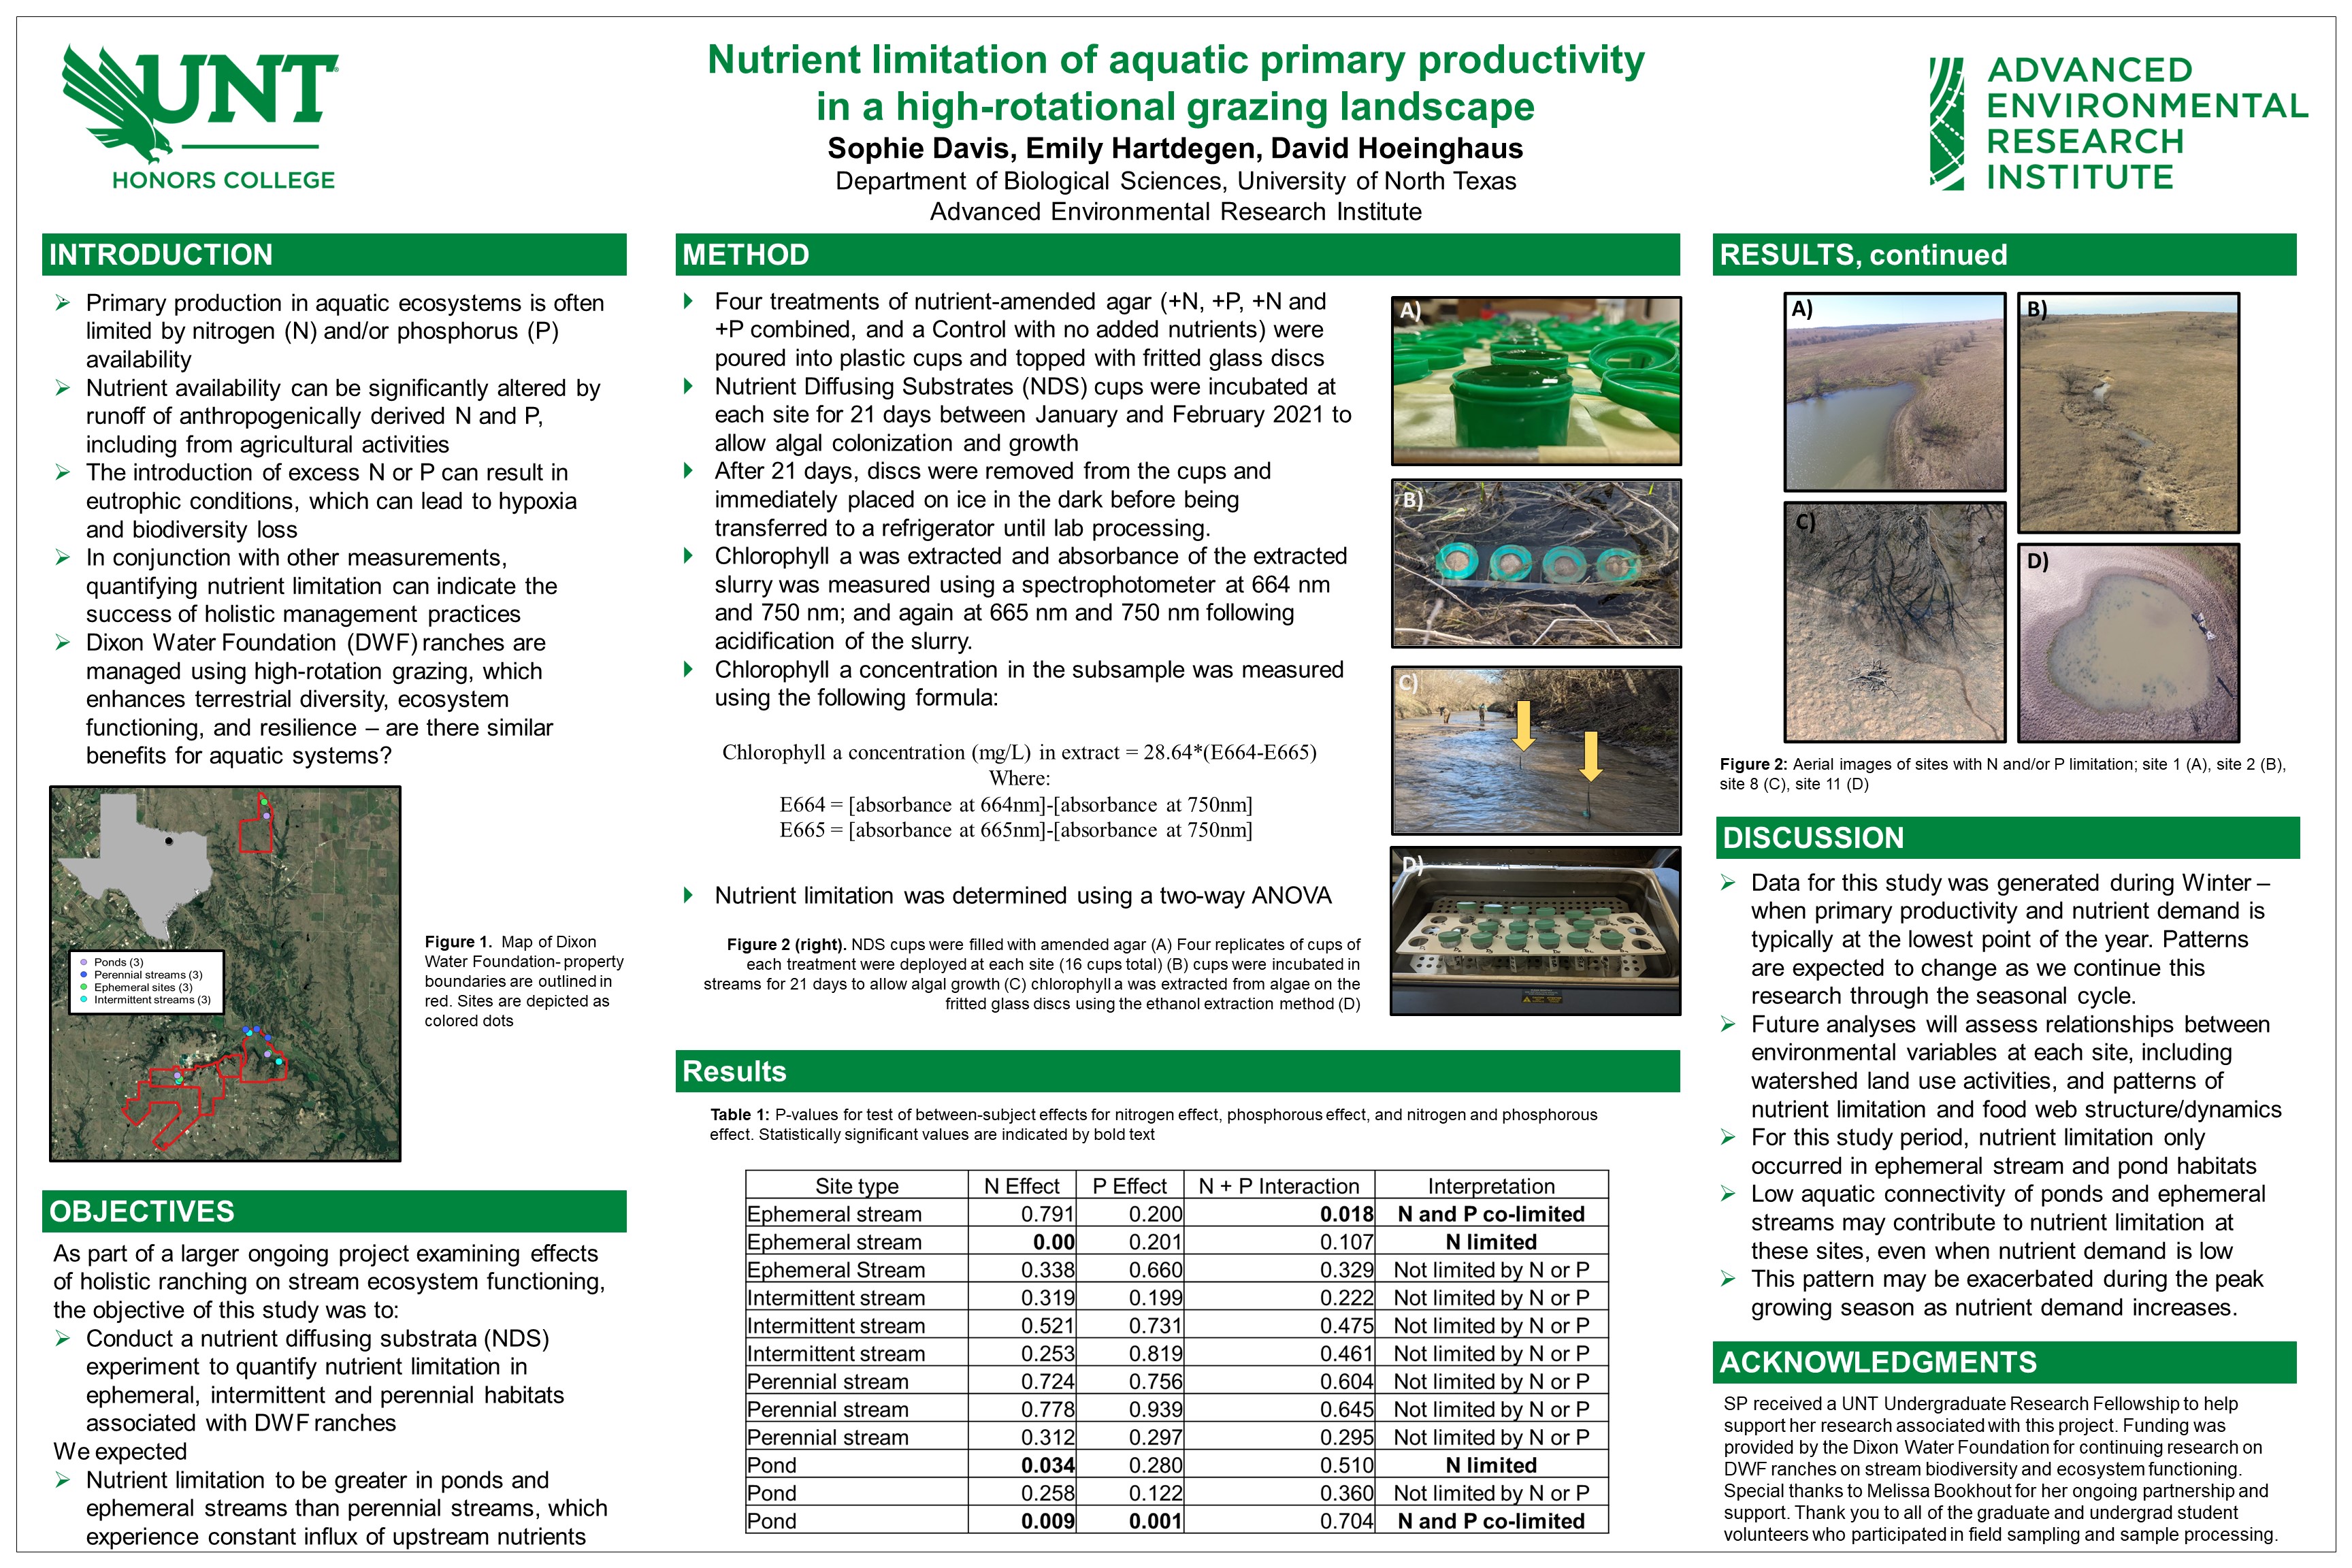 Nutrient limitation of aquatic primary productivity in a high-rotational grazing landscape